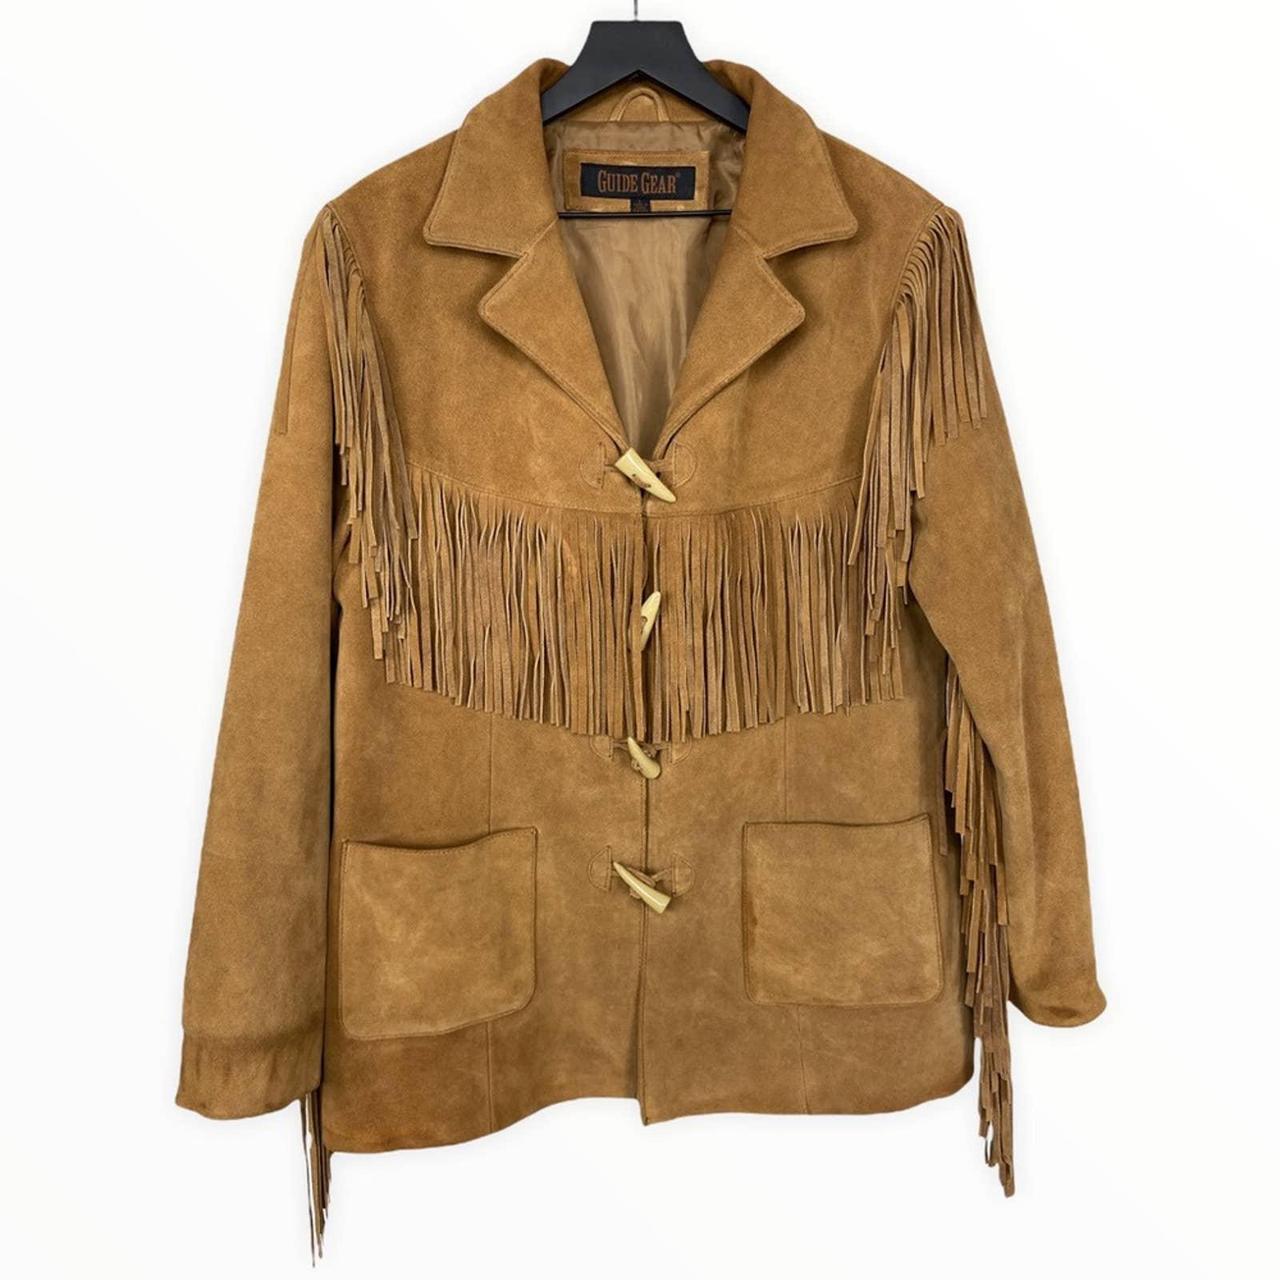 Product Image 1 - Western Style Jacket in a